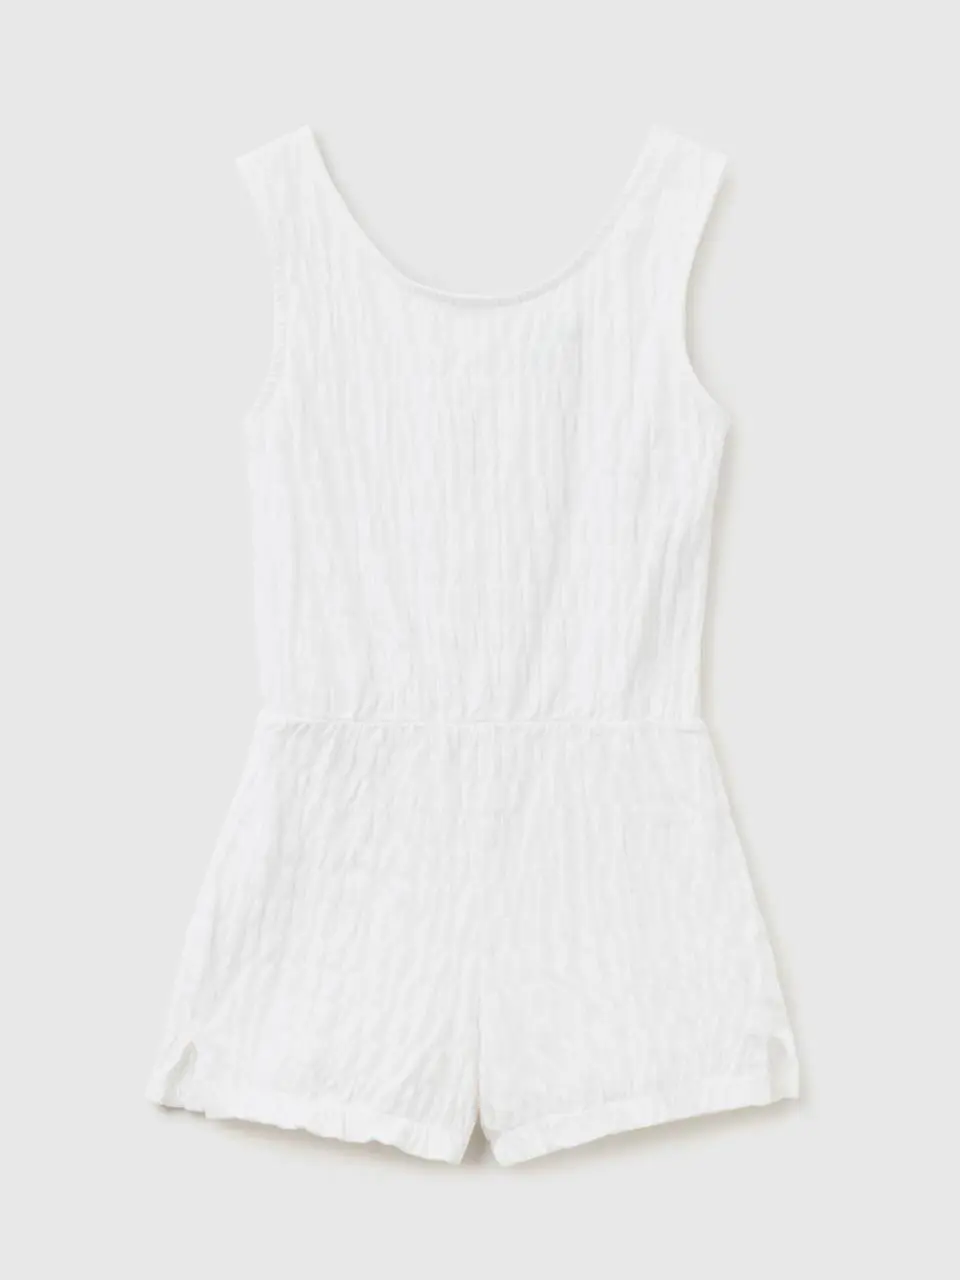 Benetton gathered jumpsuit with drawstrings. 1